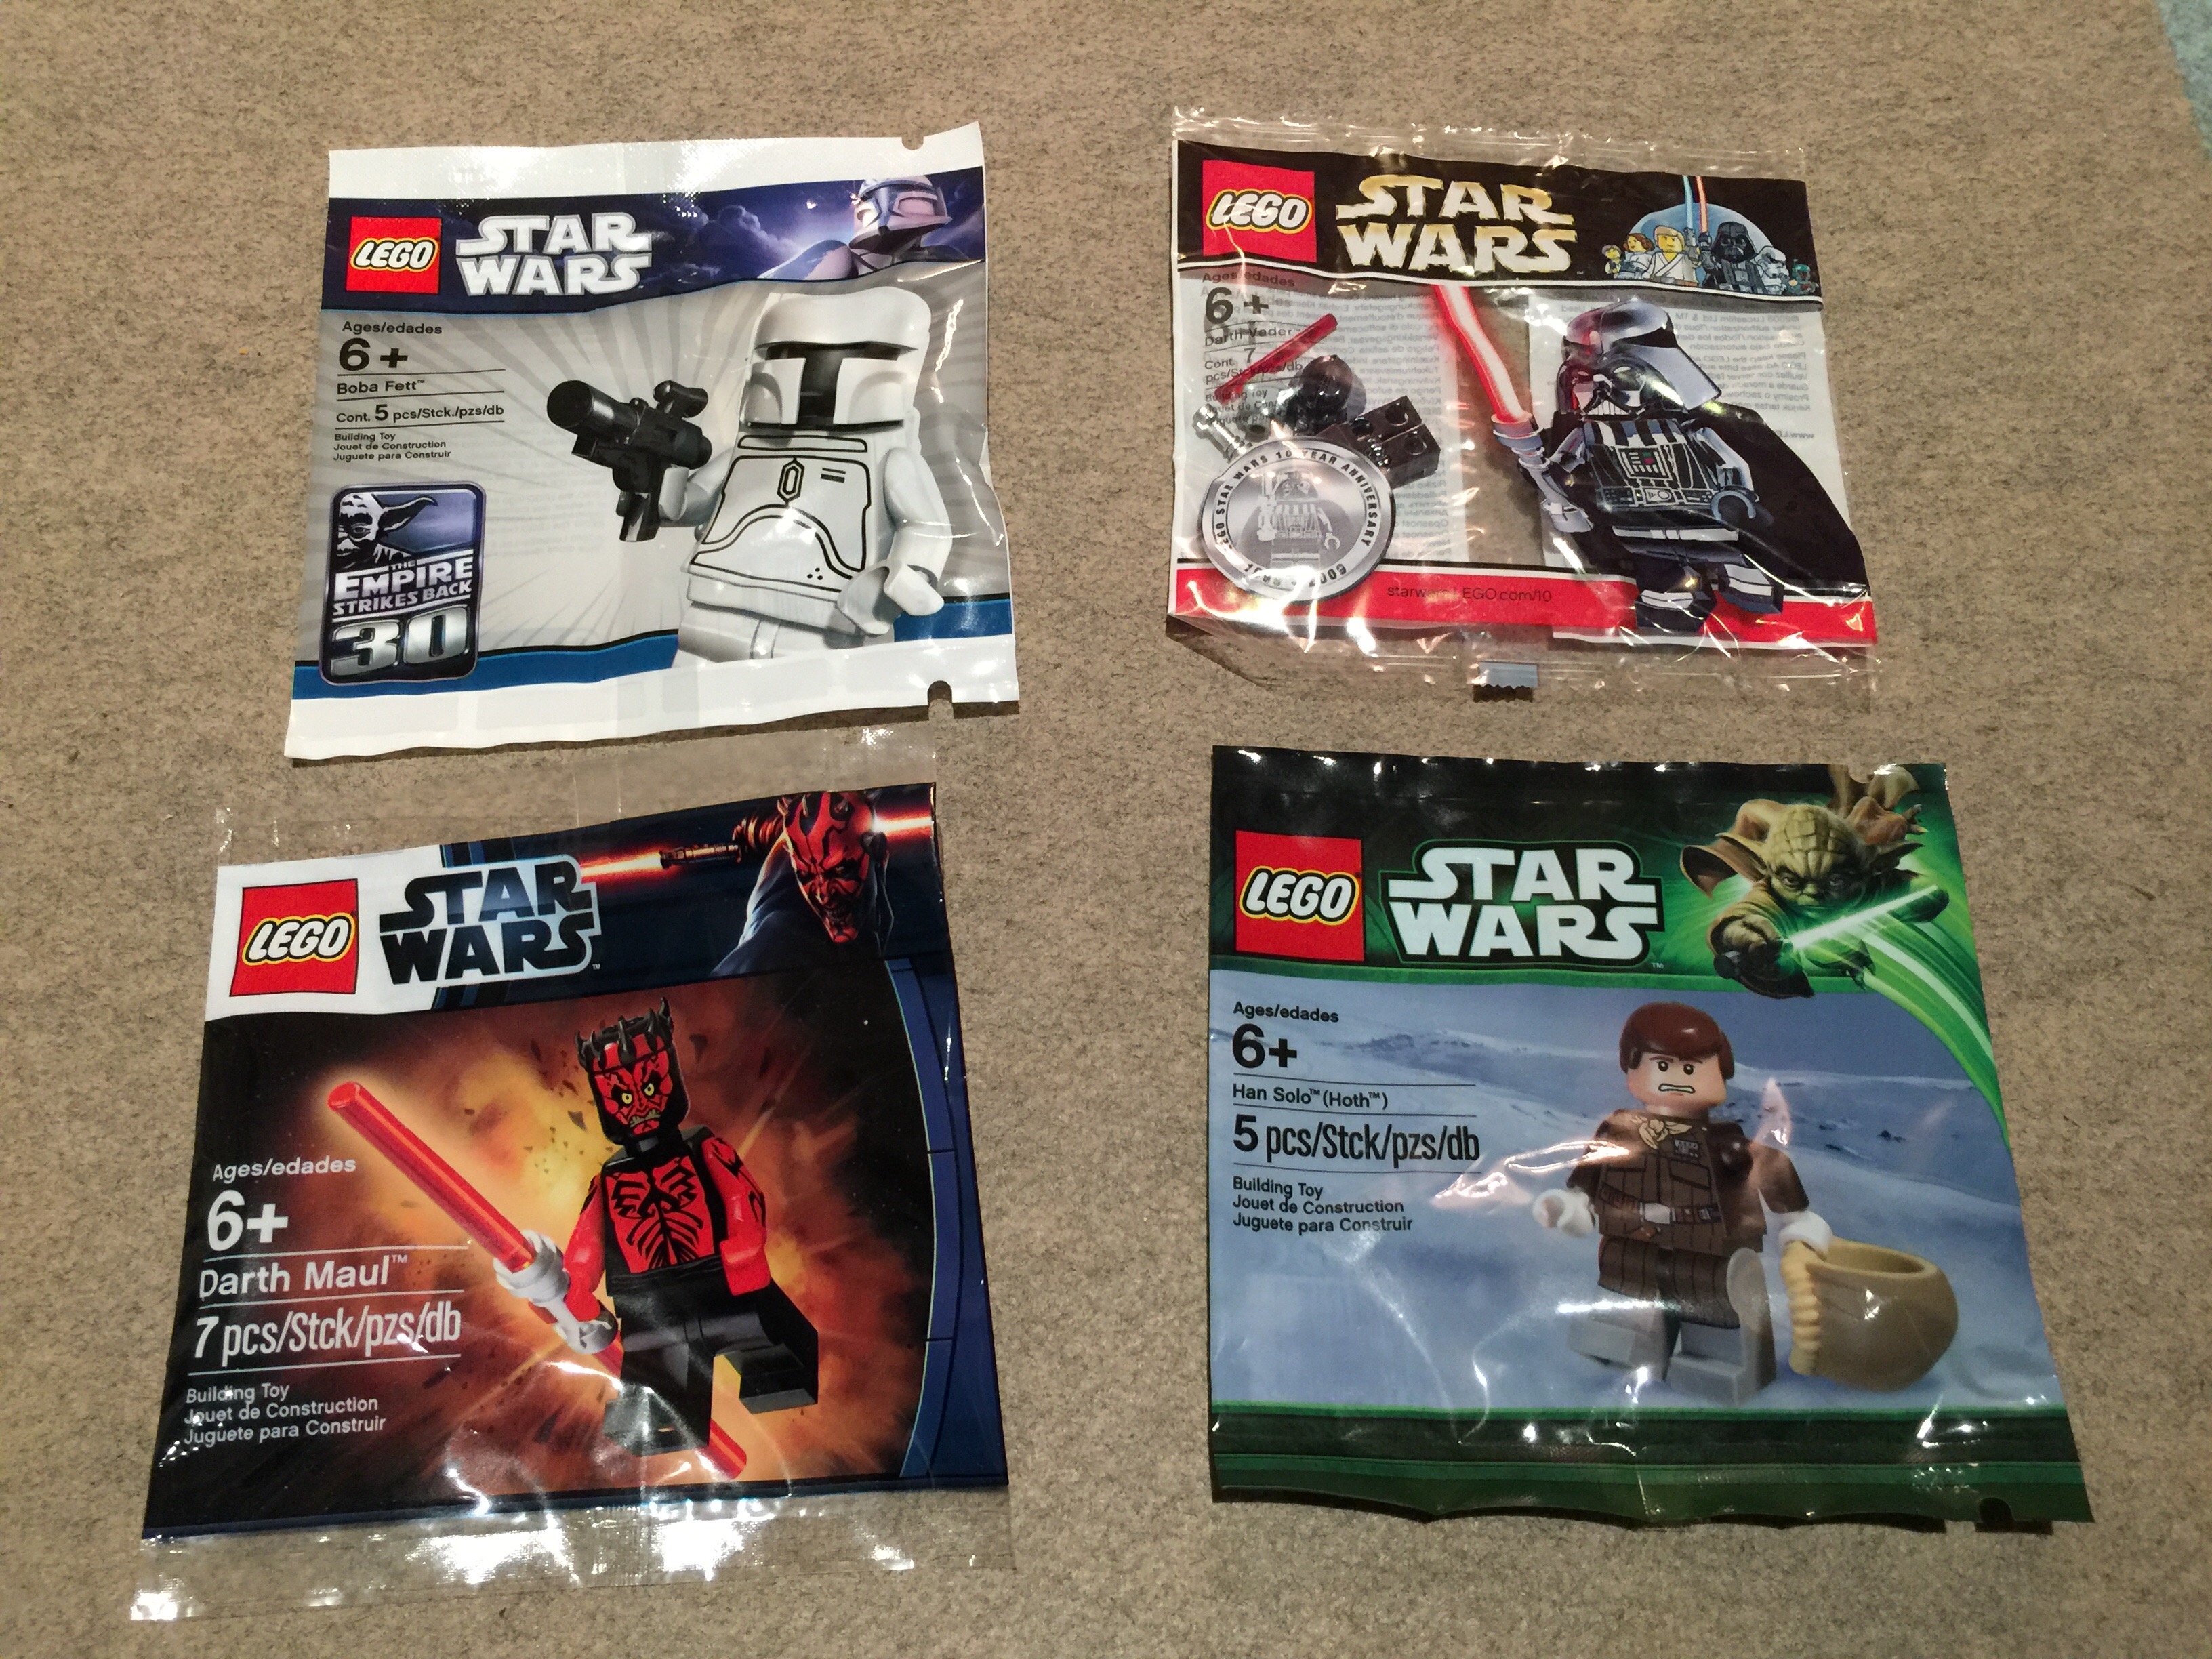 12 Days of Christmas Day 12 Giveaway: Star Wars Minifig 4-Pack - FBTB